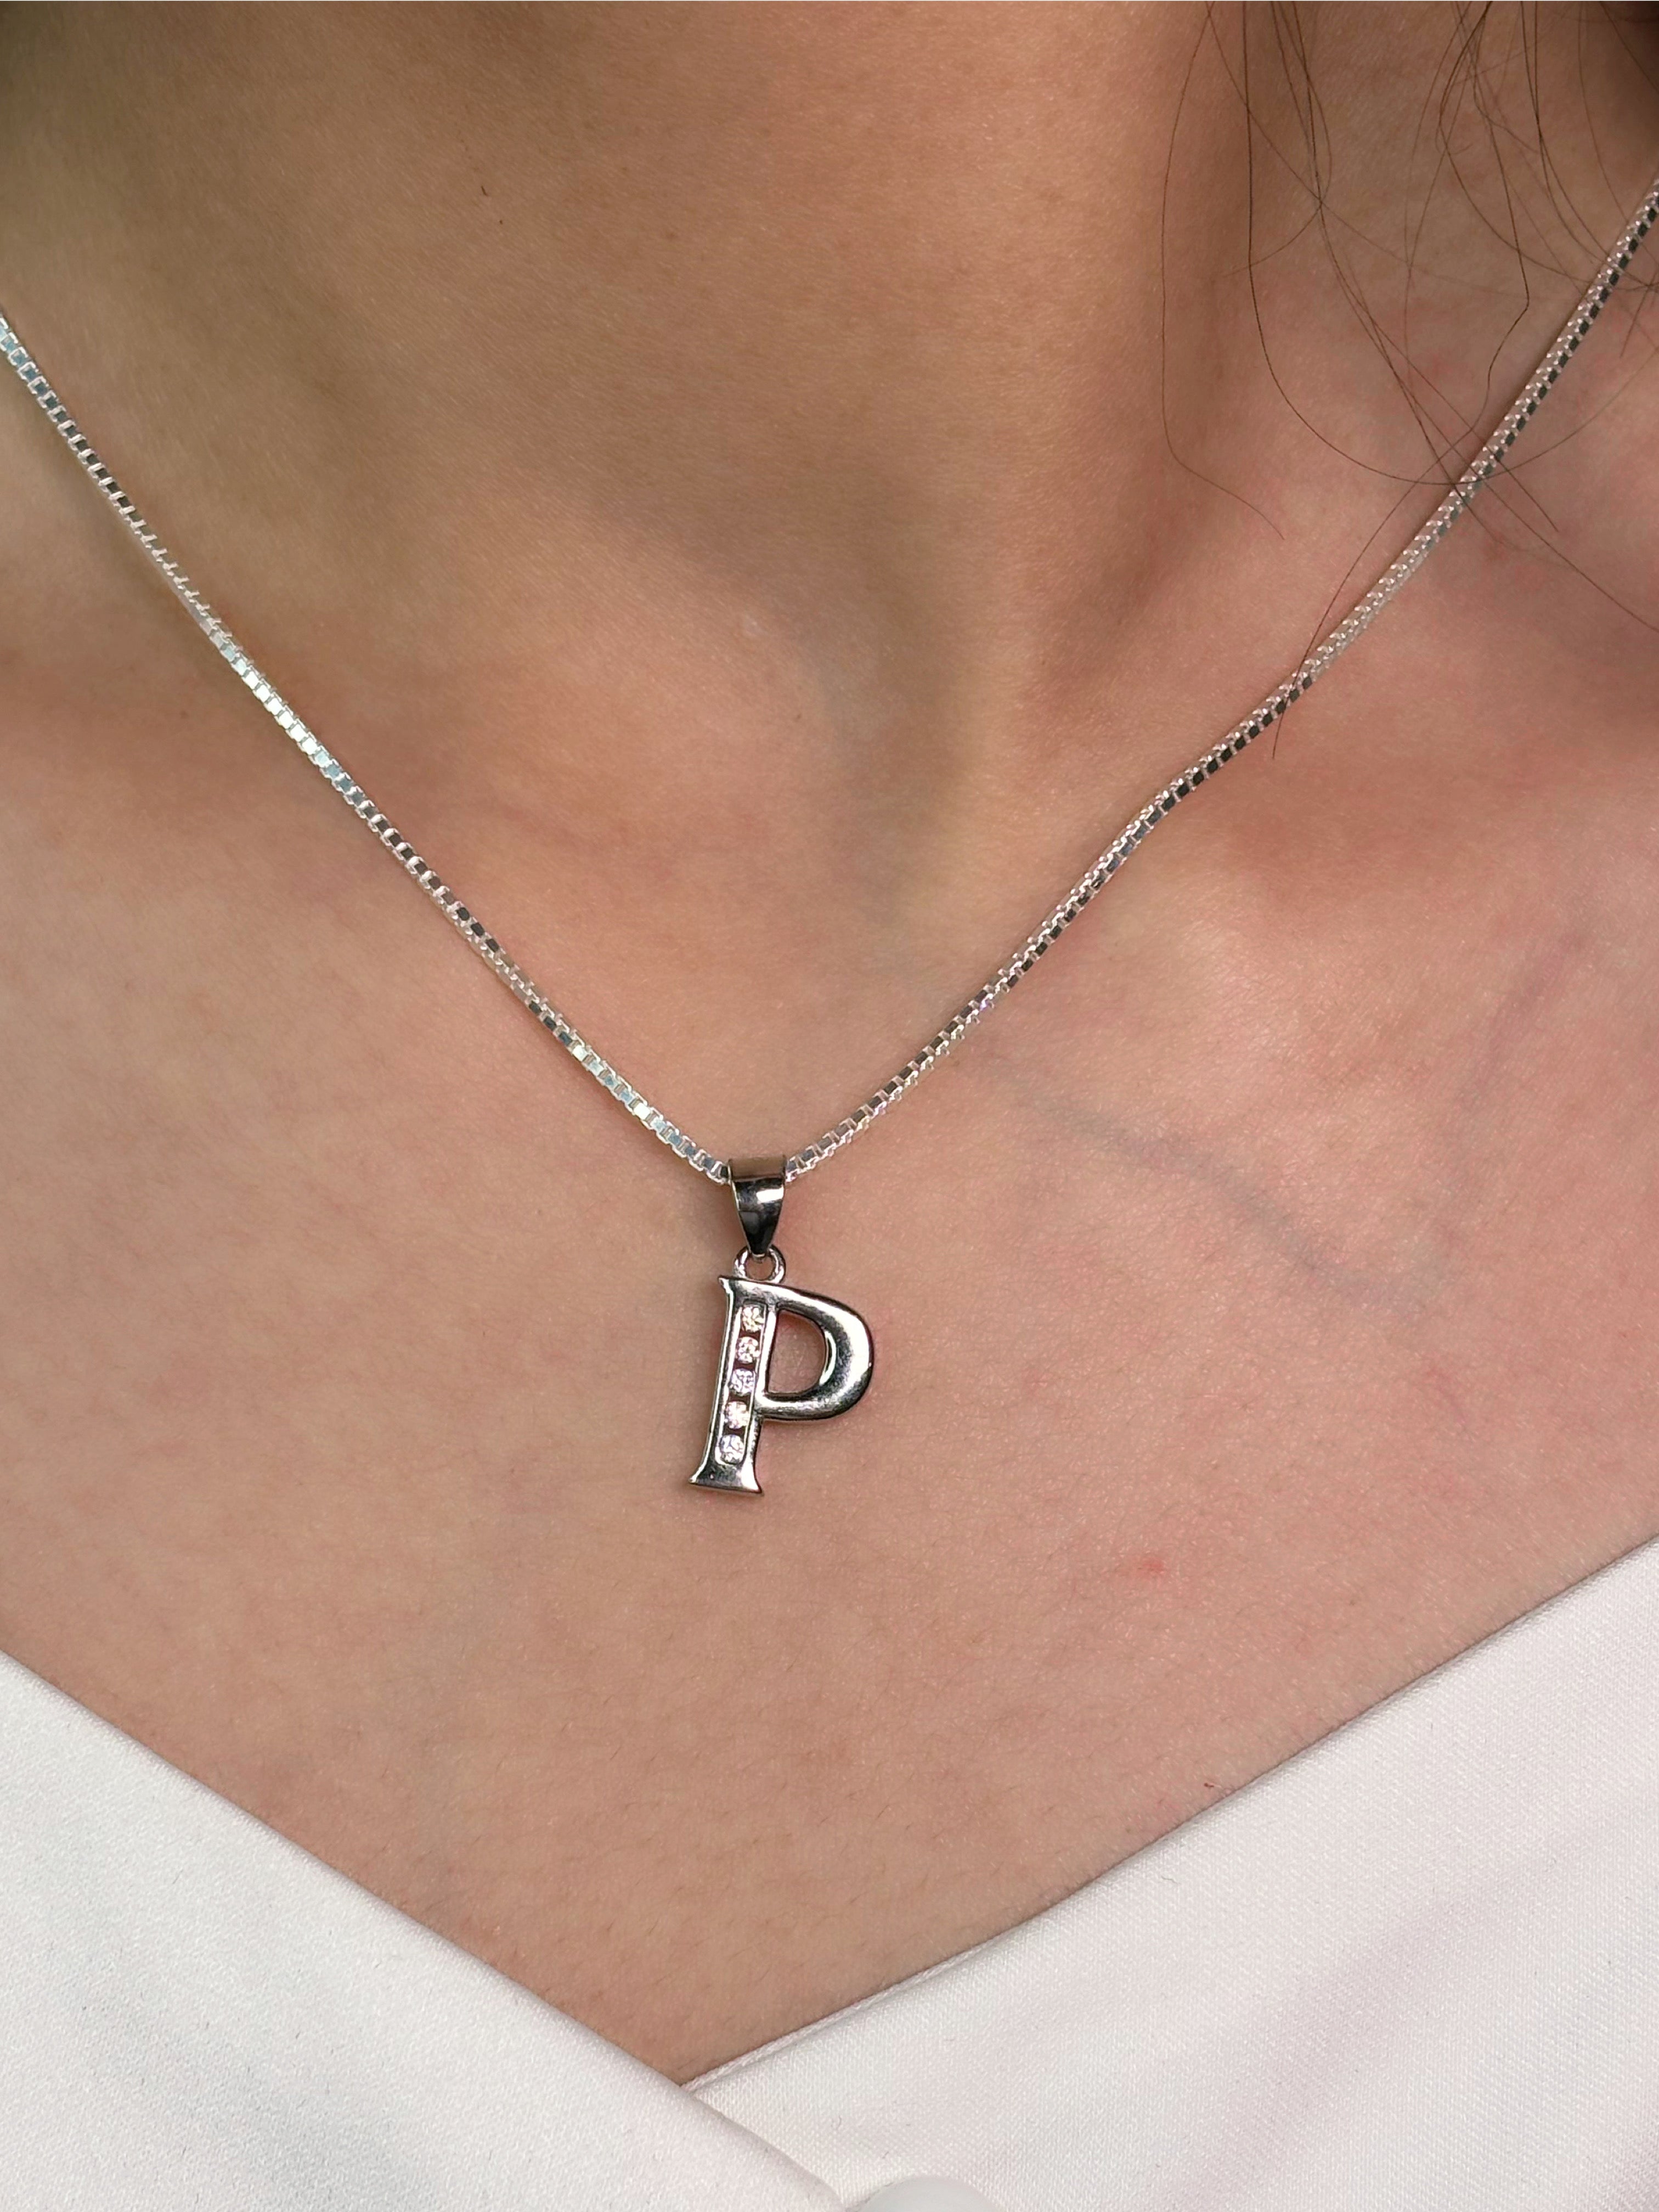 Silver Chain Pendent